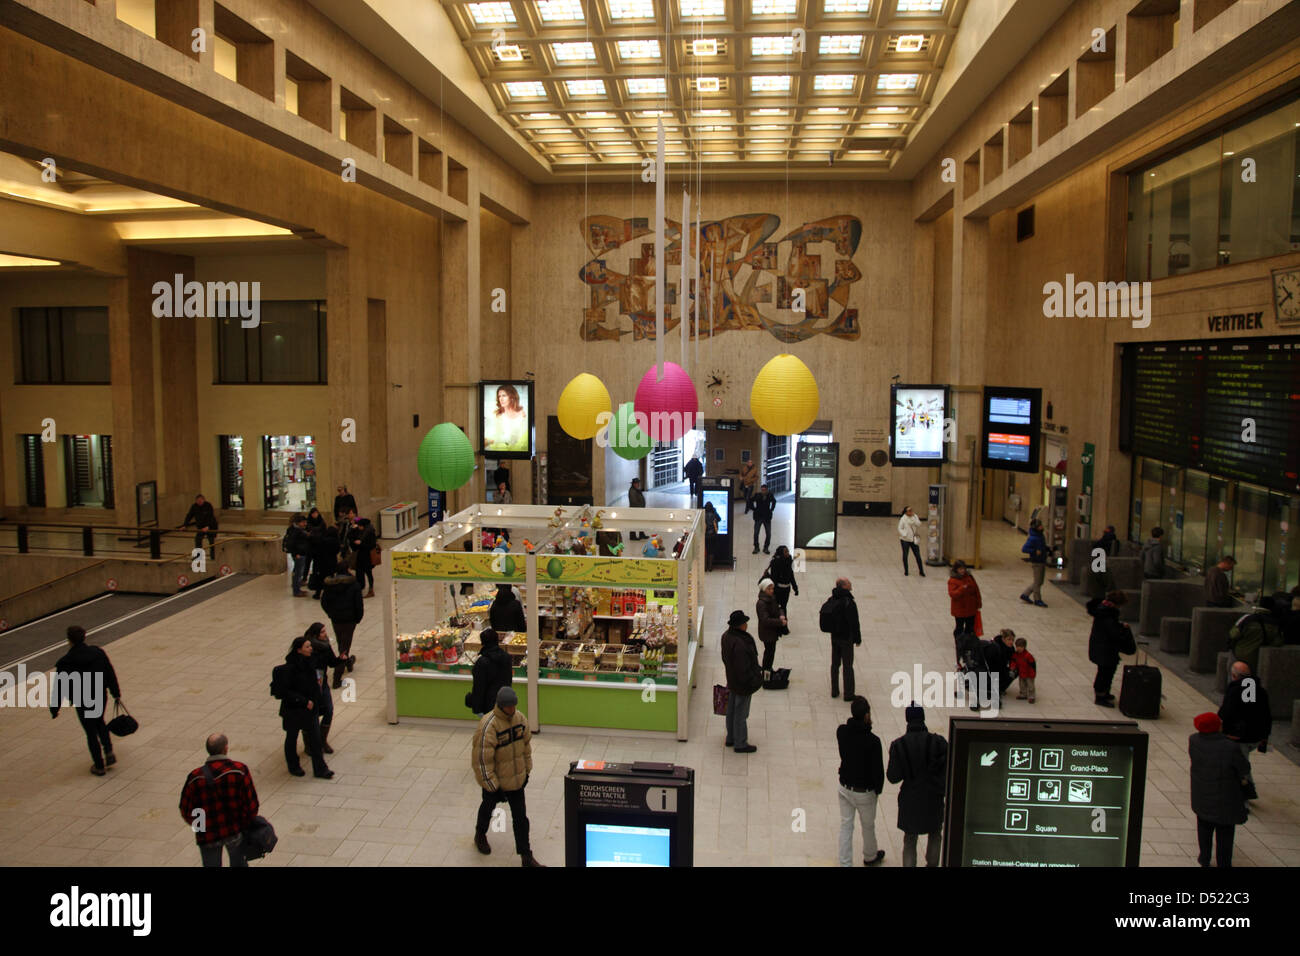 Brussels Central Station Concourse, Belgium Stock Photo